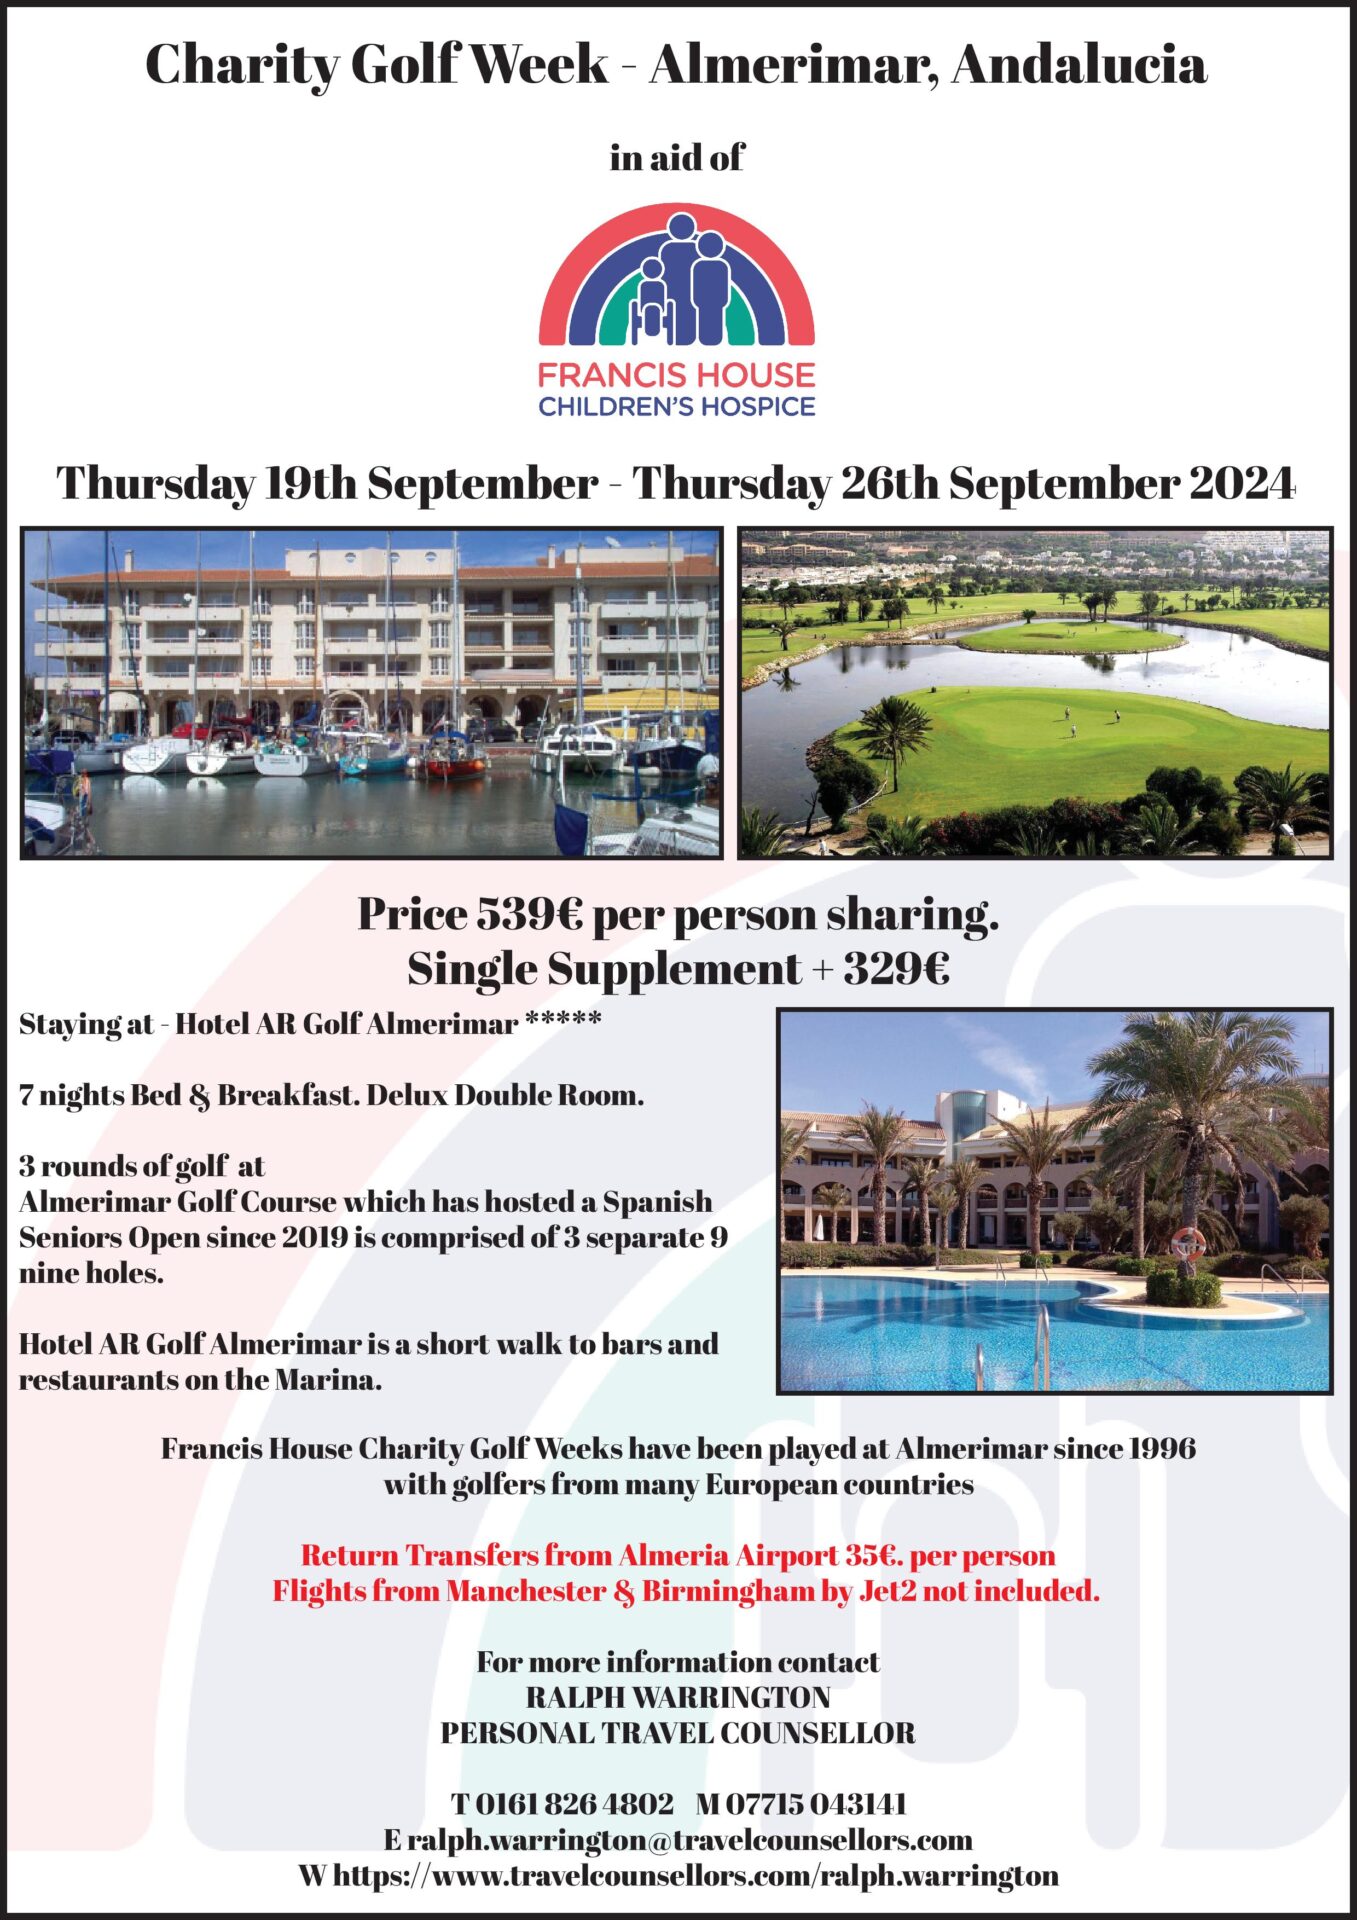 A flyer advertising the Almerimar Charity Golf Holiday